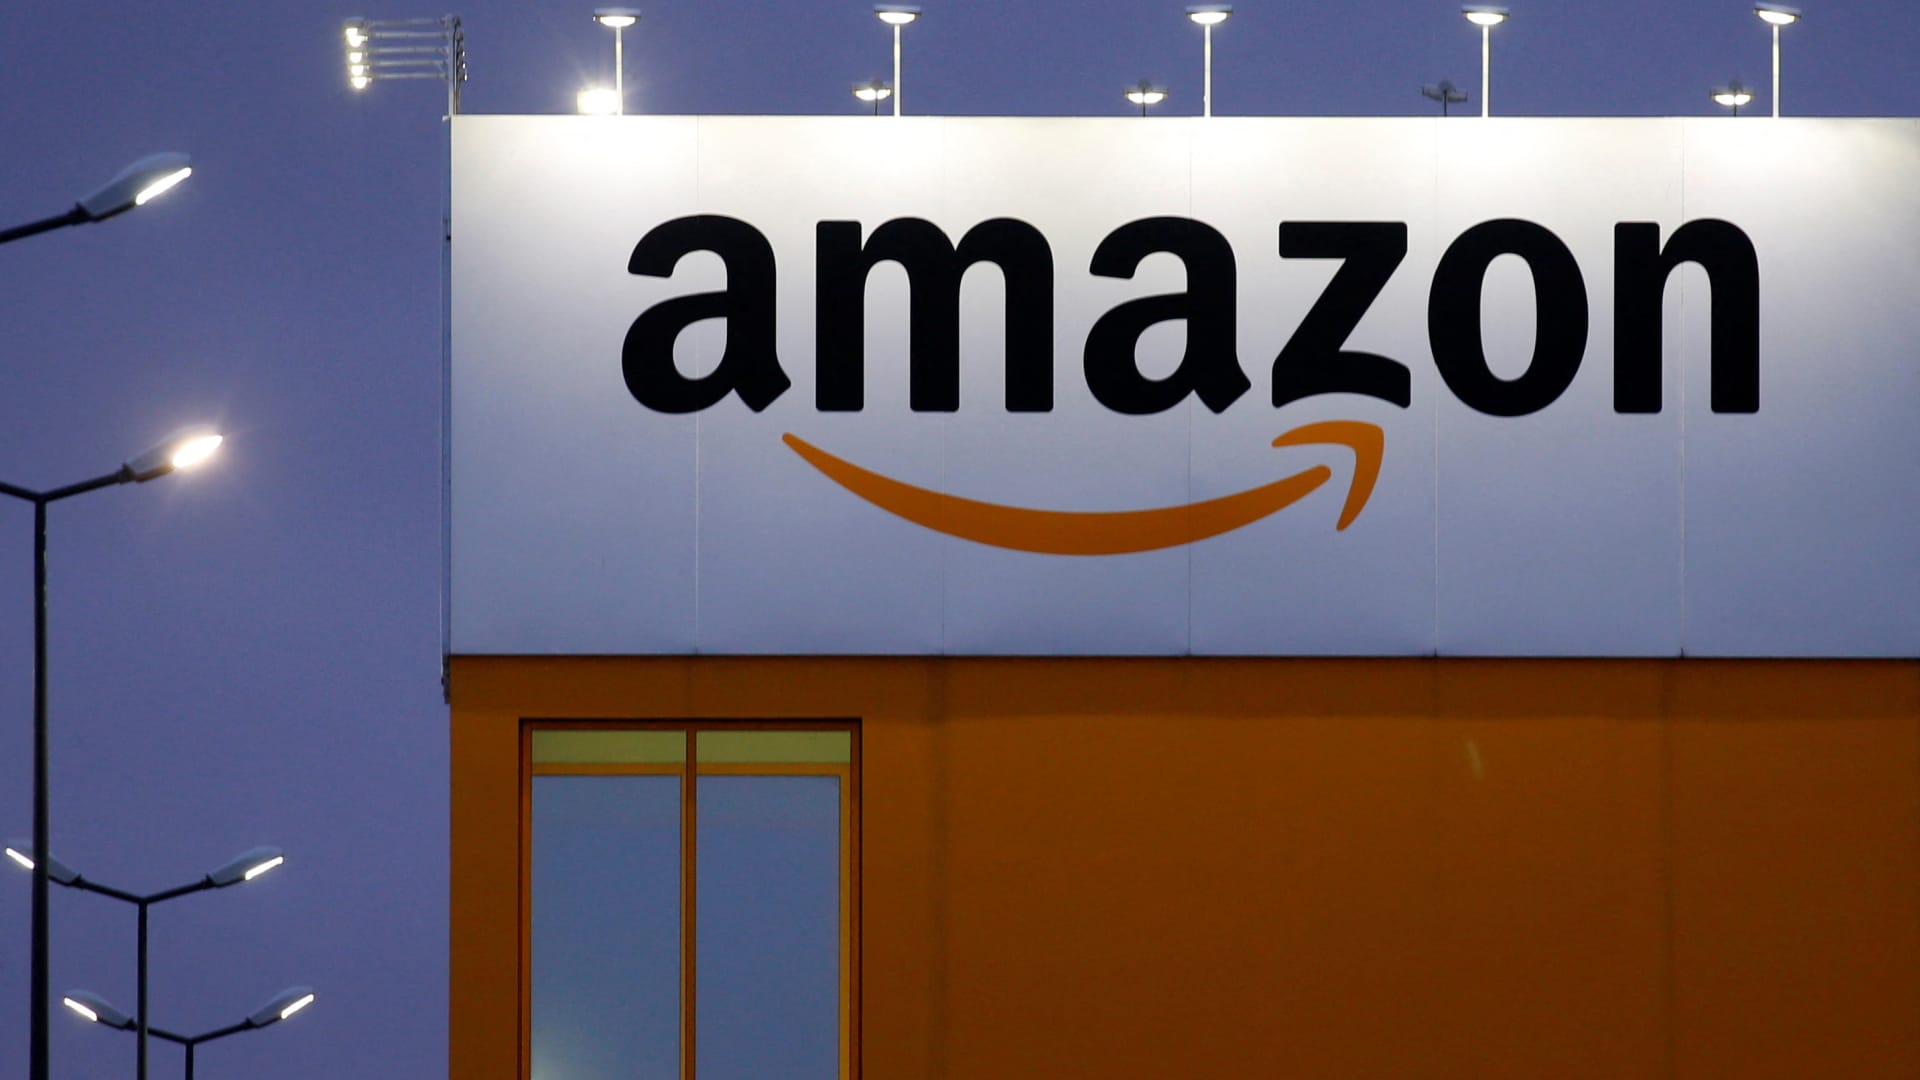 Amazon is down 40% this year — is now the time to buy? Market pros give their take